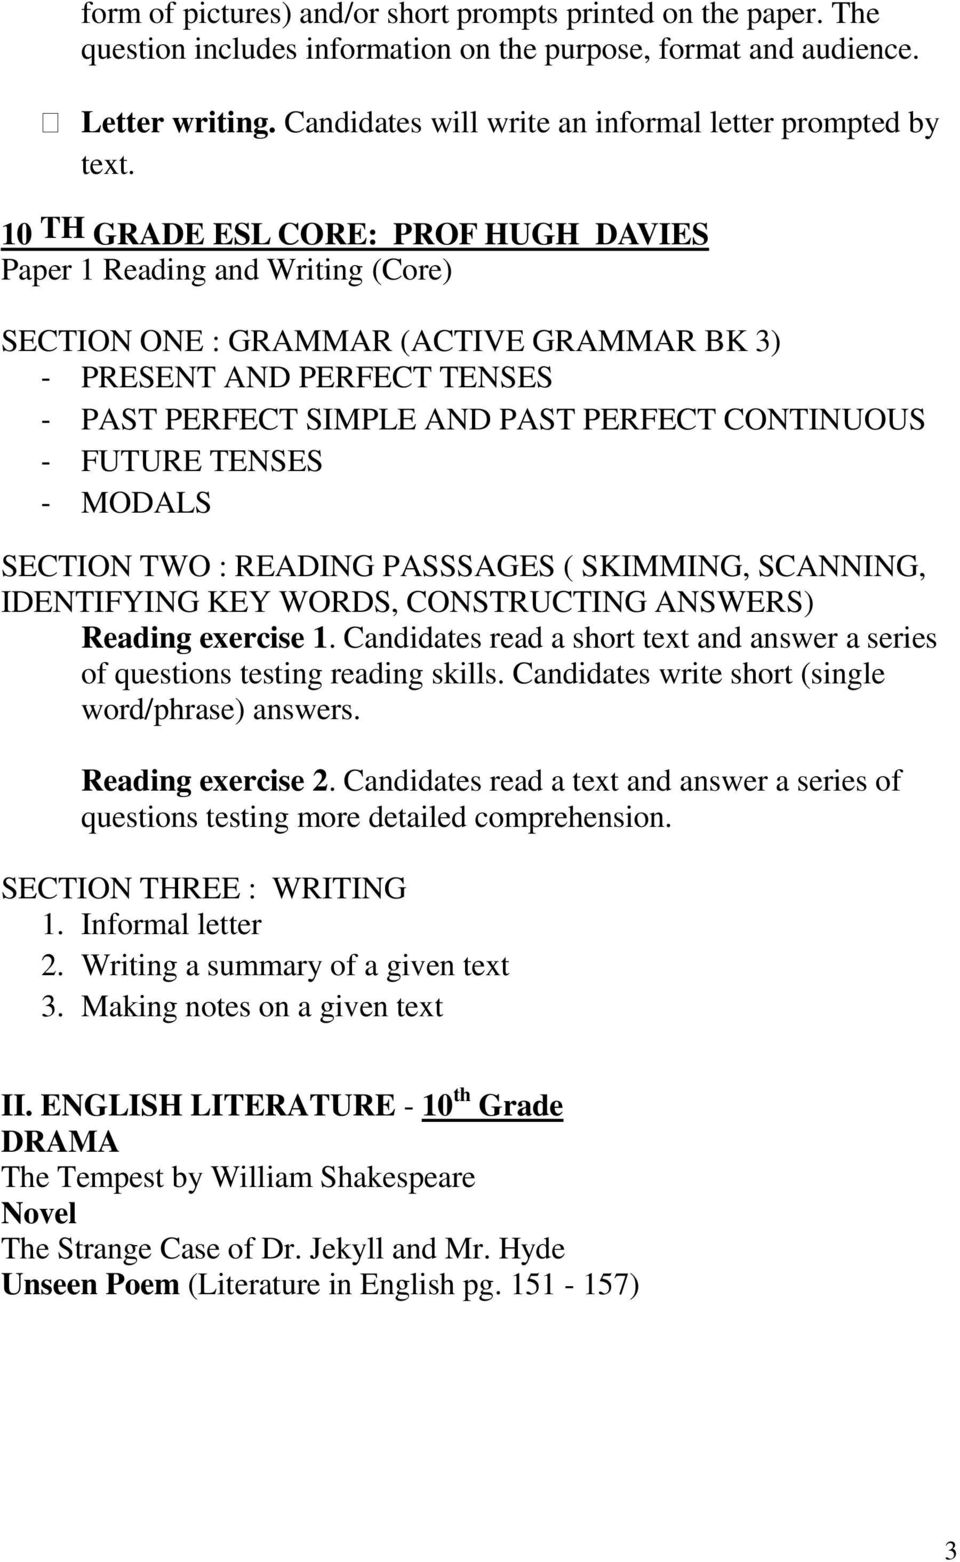 10 TH GRADE ESL CORE: PROF HUGH DAVIES Paper 1 Reading and Writing (Core) SECTION ONE : GRAMMAR (ACTIVE GRAMMAR BK 3) - PRESENT AND PERFECT TENSES - PAST PERFECT SIMPLE AND PAST PERFECT CONTINUOUS -